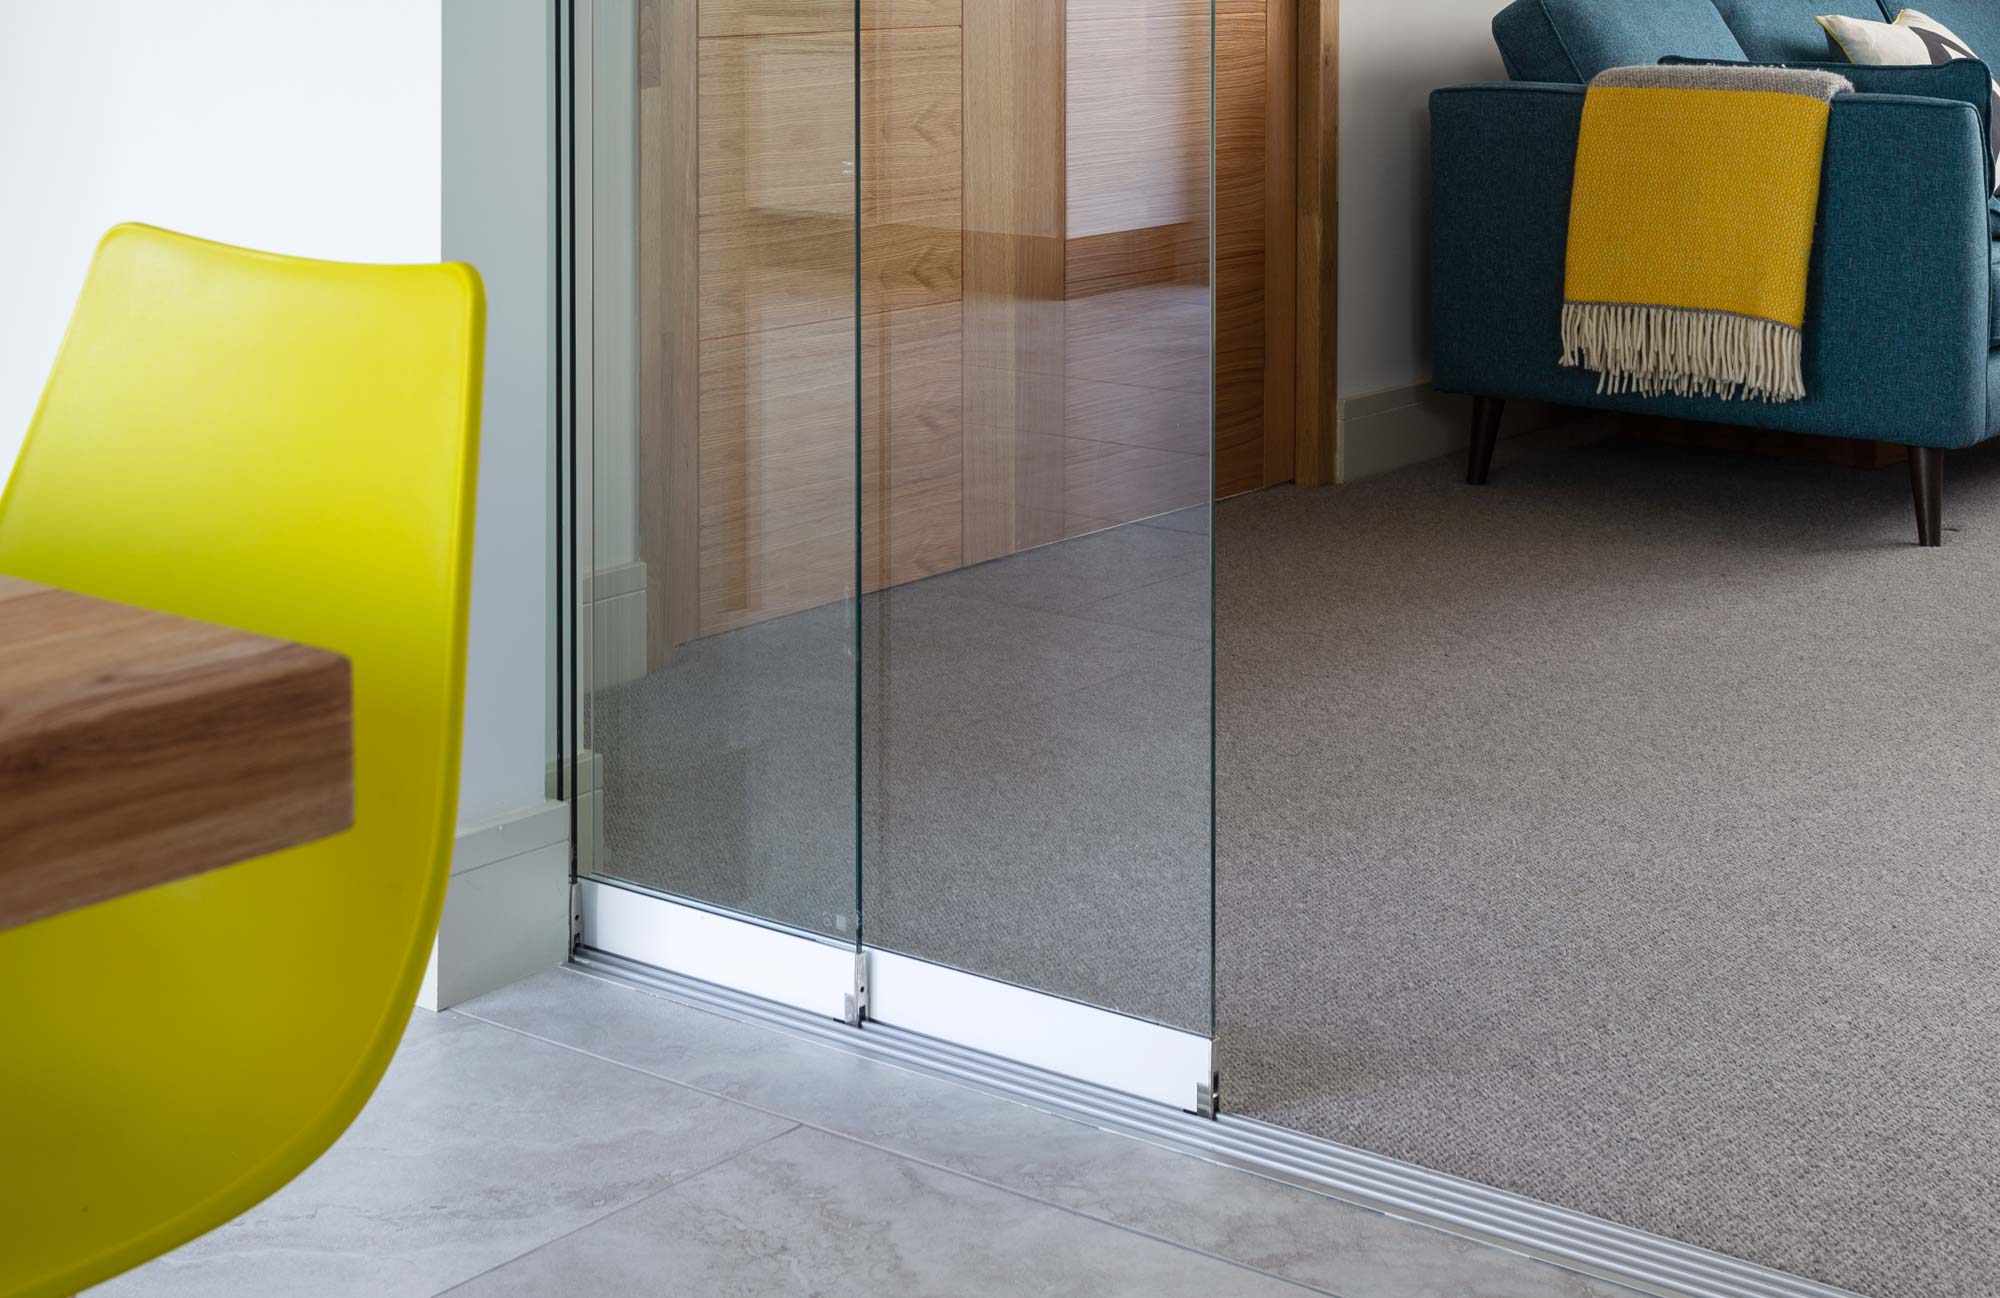 Internal glass partitions and sliding doors